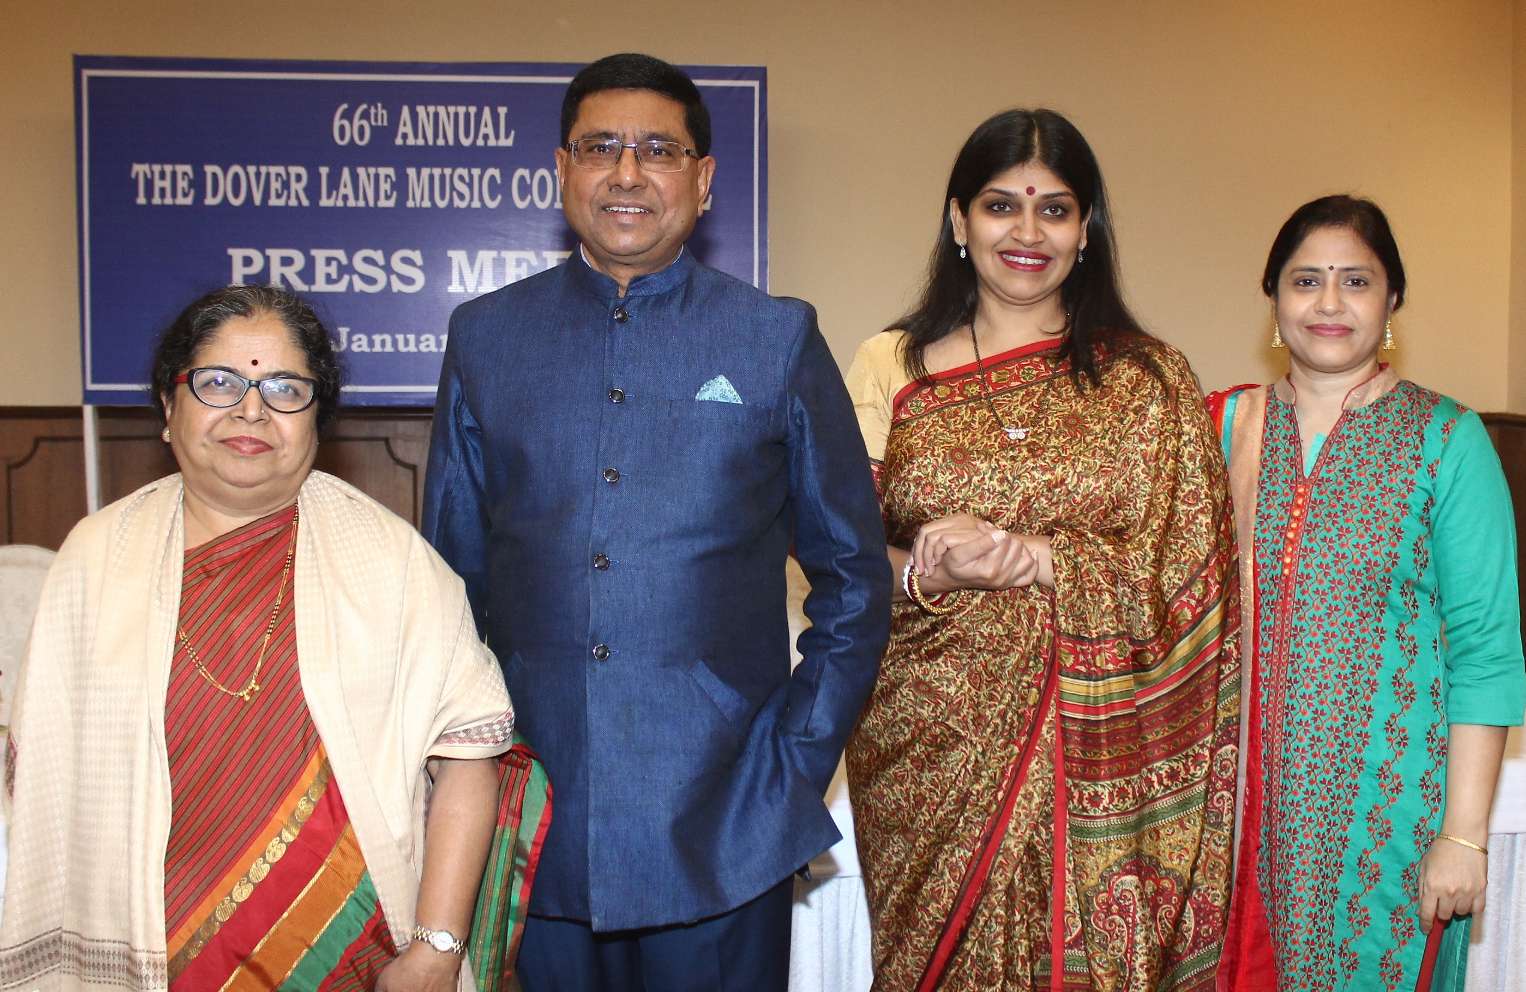 Press Meet for 66th Annual Dover Lane Music Conference